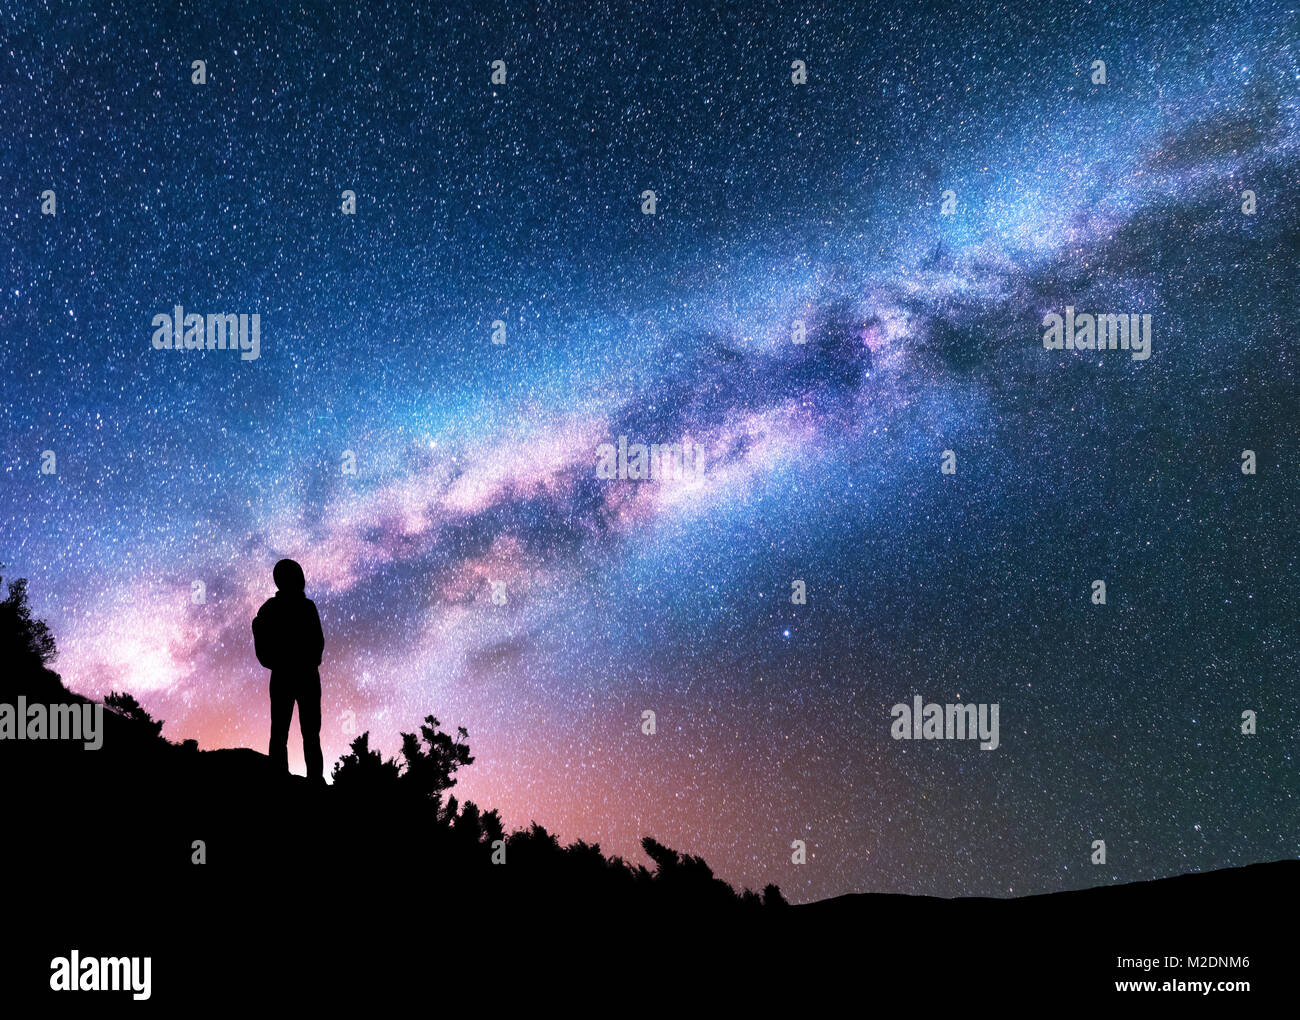 Silhouette of man with backpack on the hill against colorful Milky Way at night. Space background. Landscape with man, bright milky way, sky with star Stock Photo